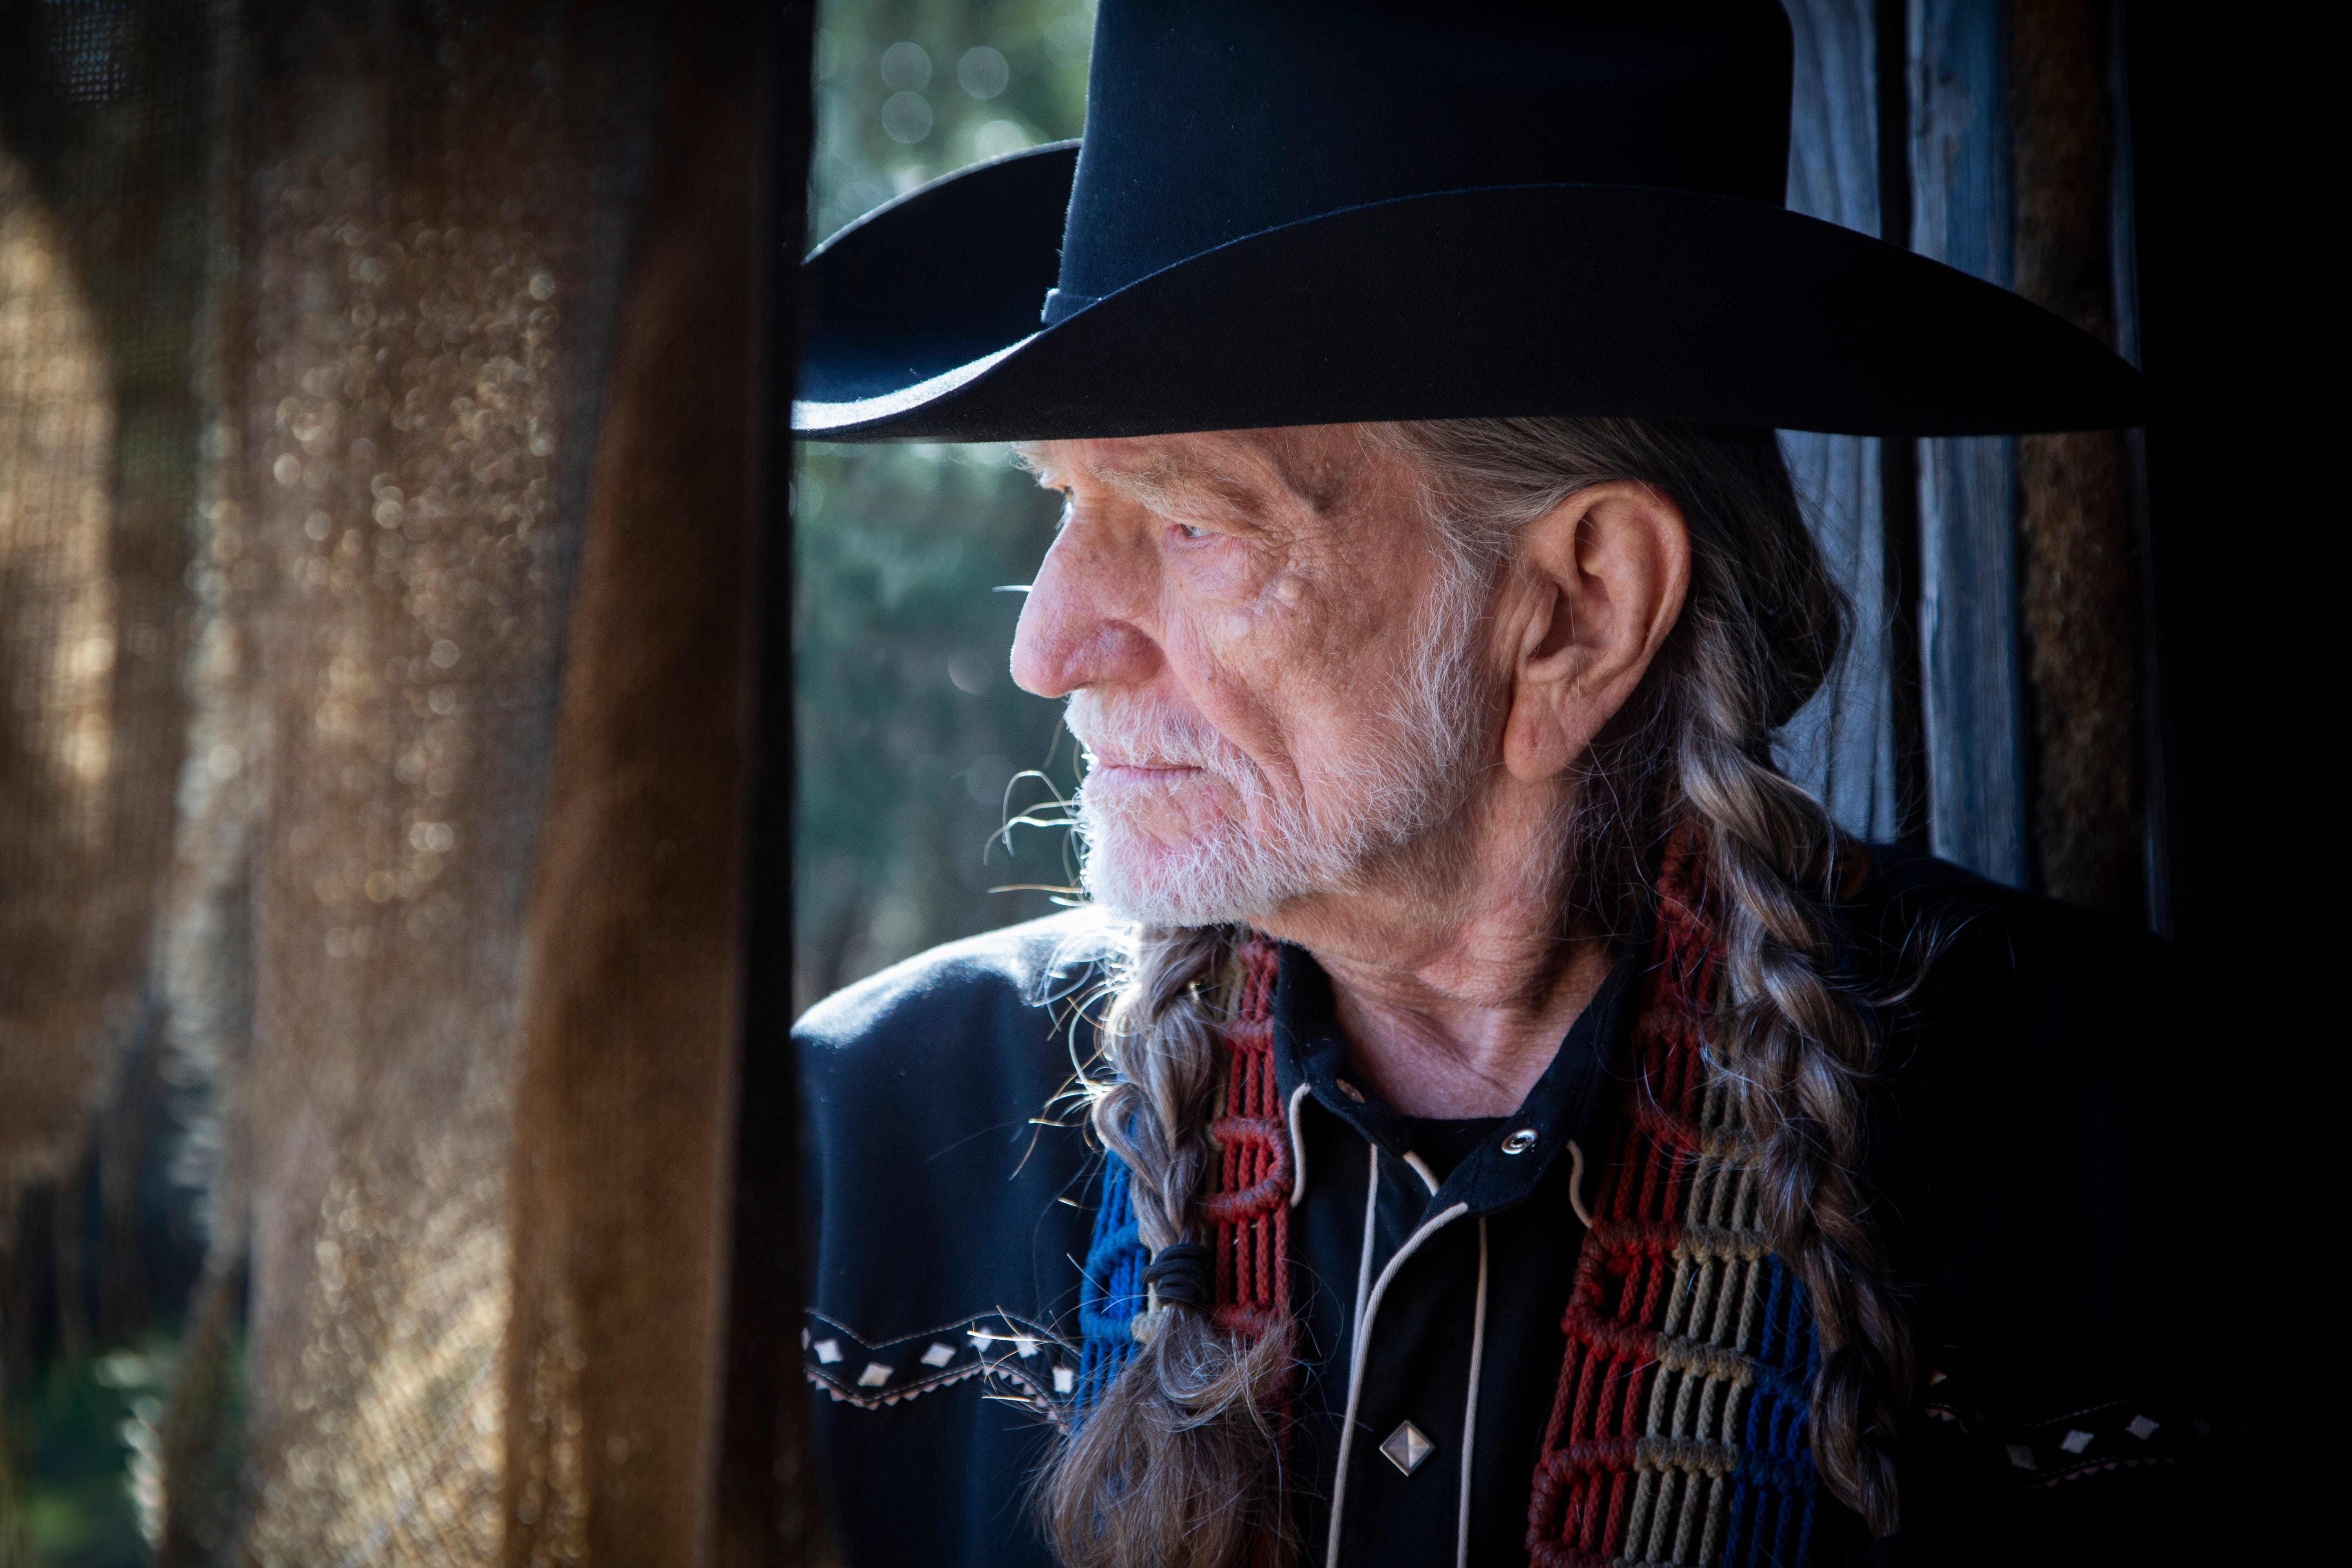 Willie Nelson's first SXSW keynote is set for Wednesday.